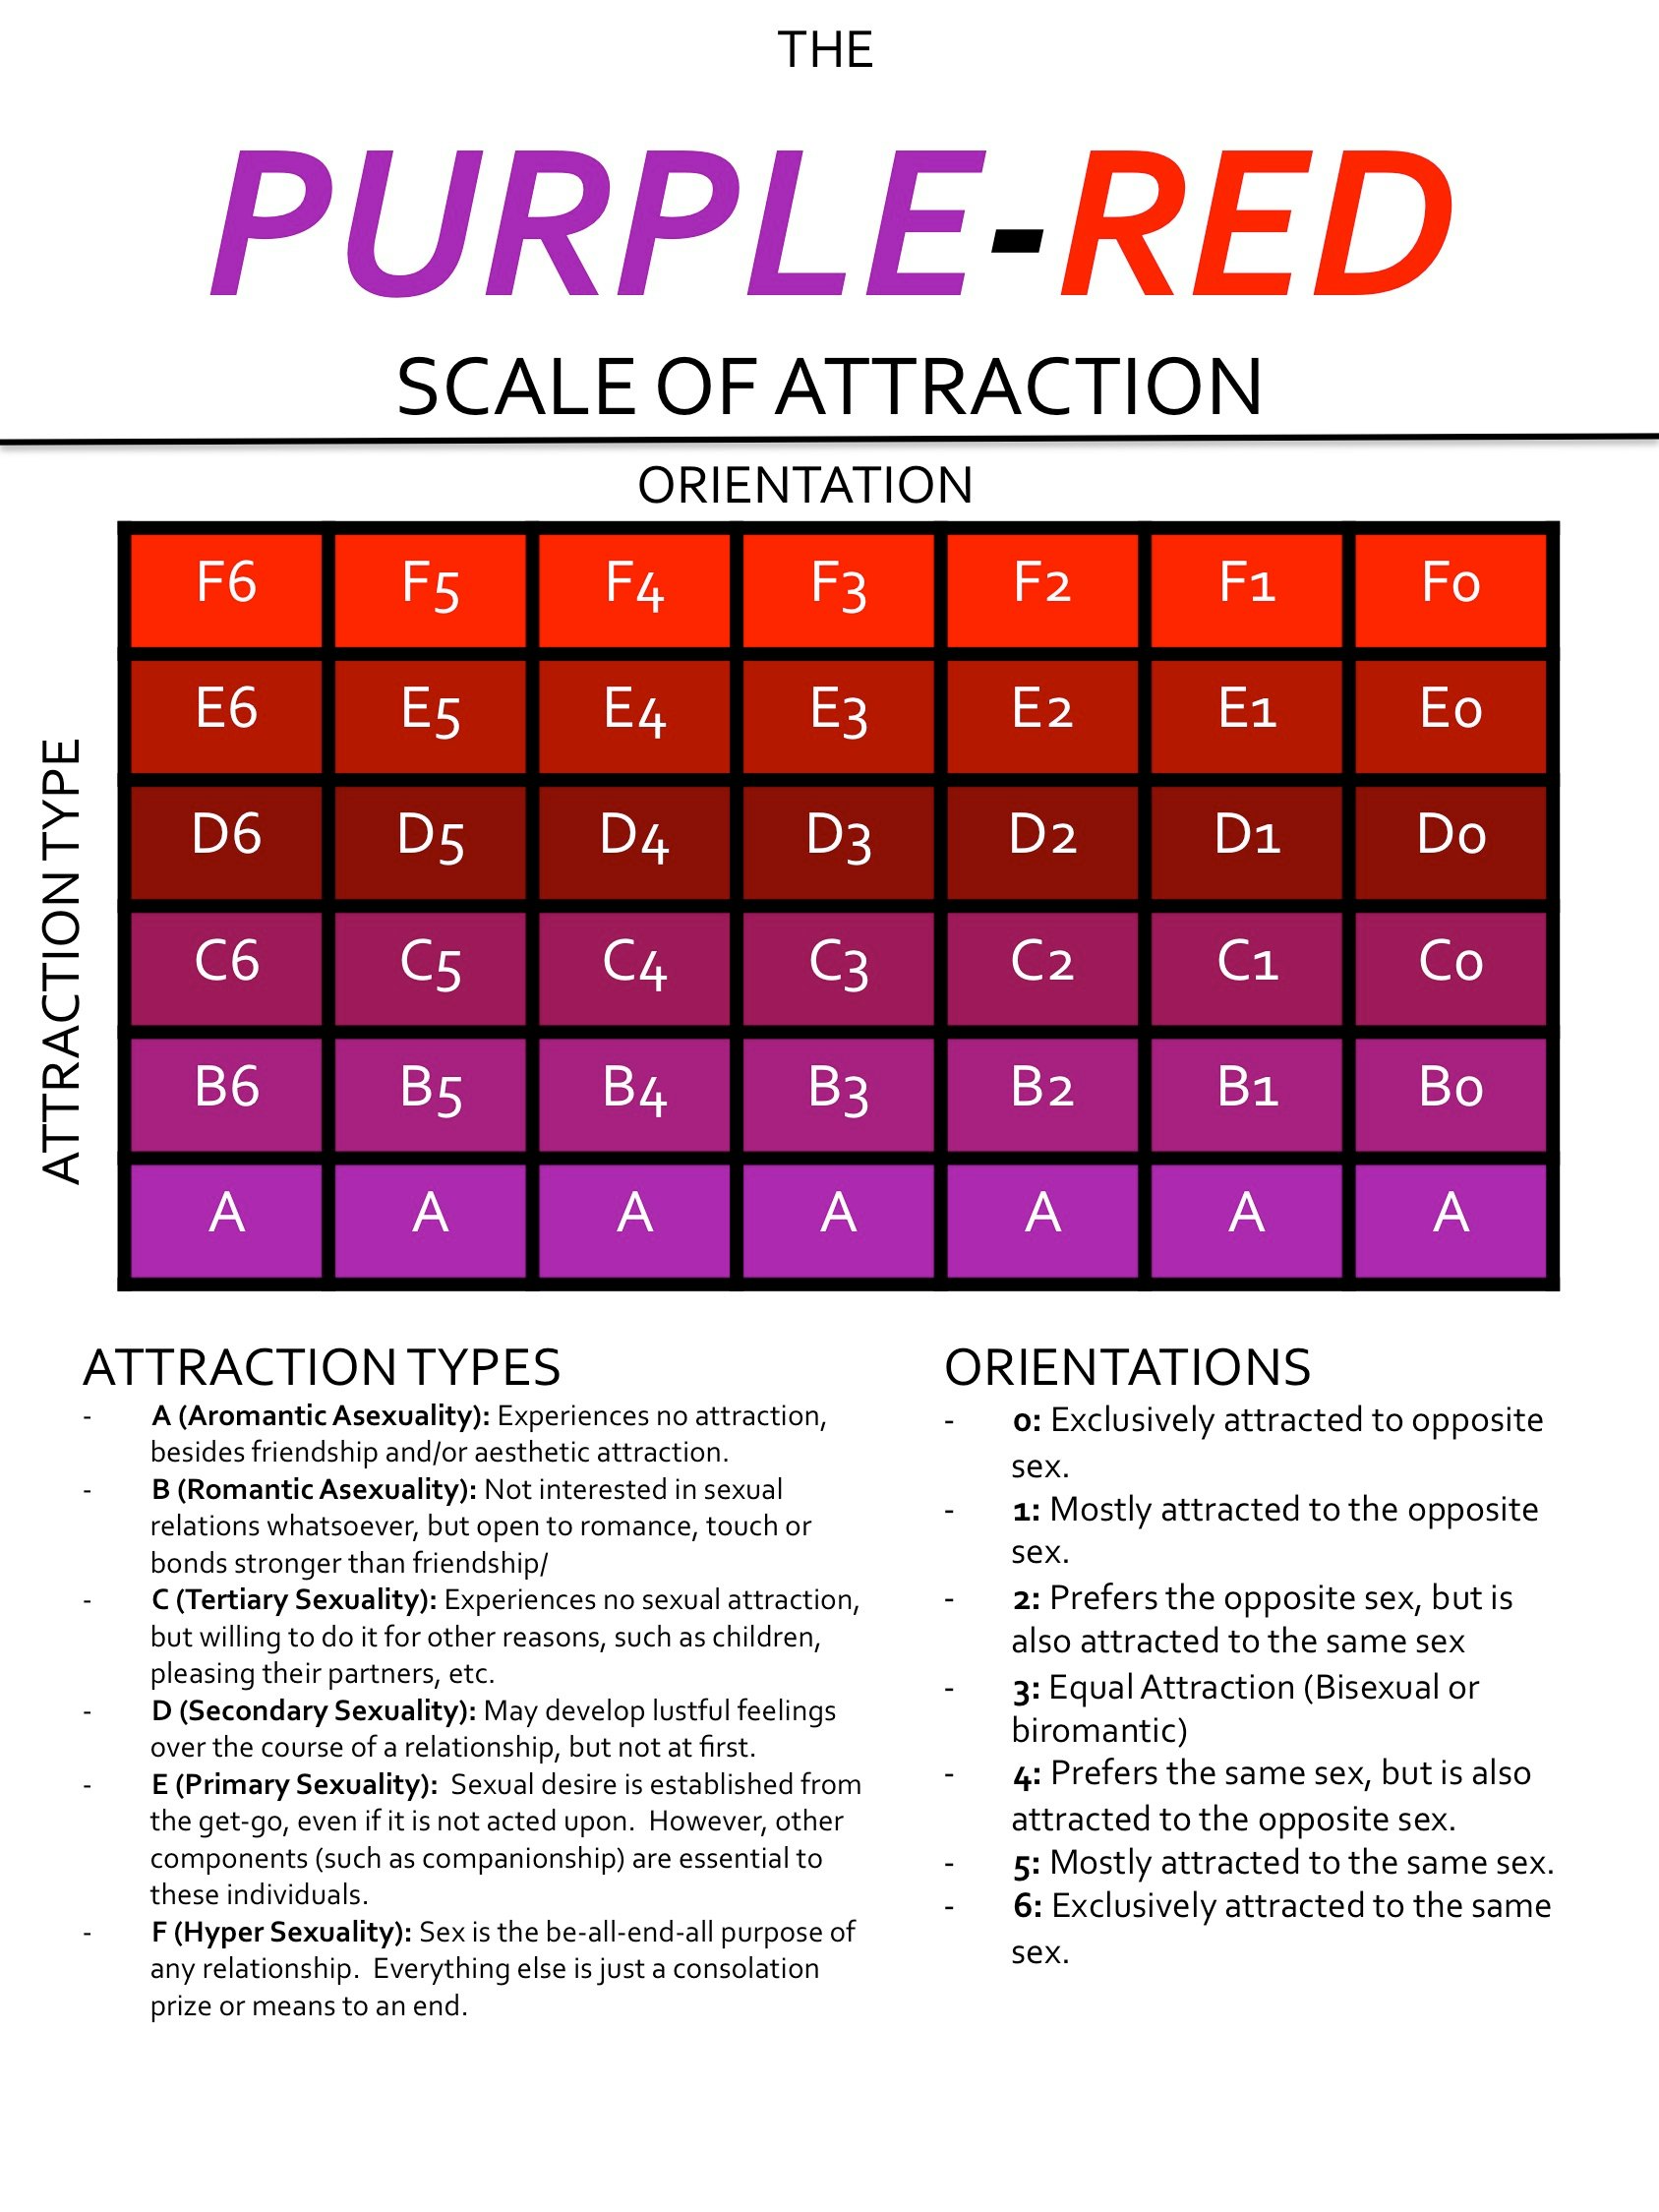 kinsey scale test asexual